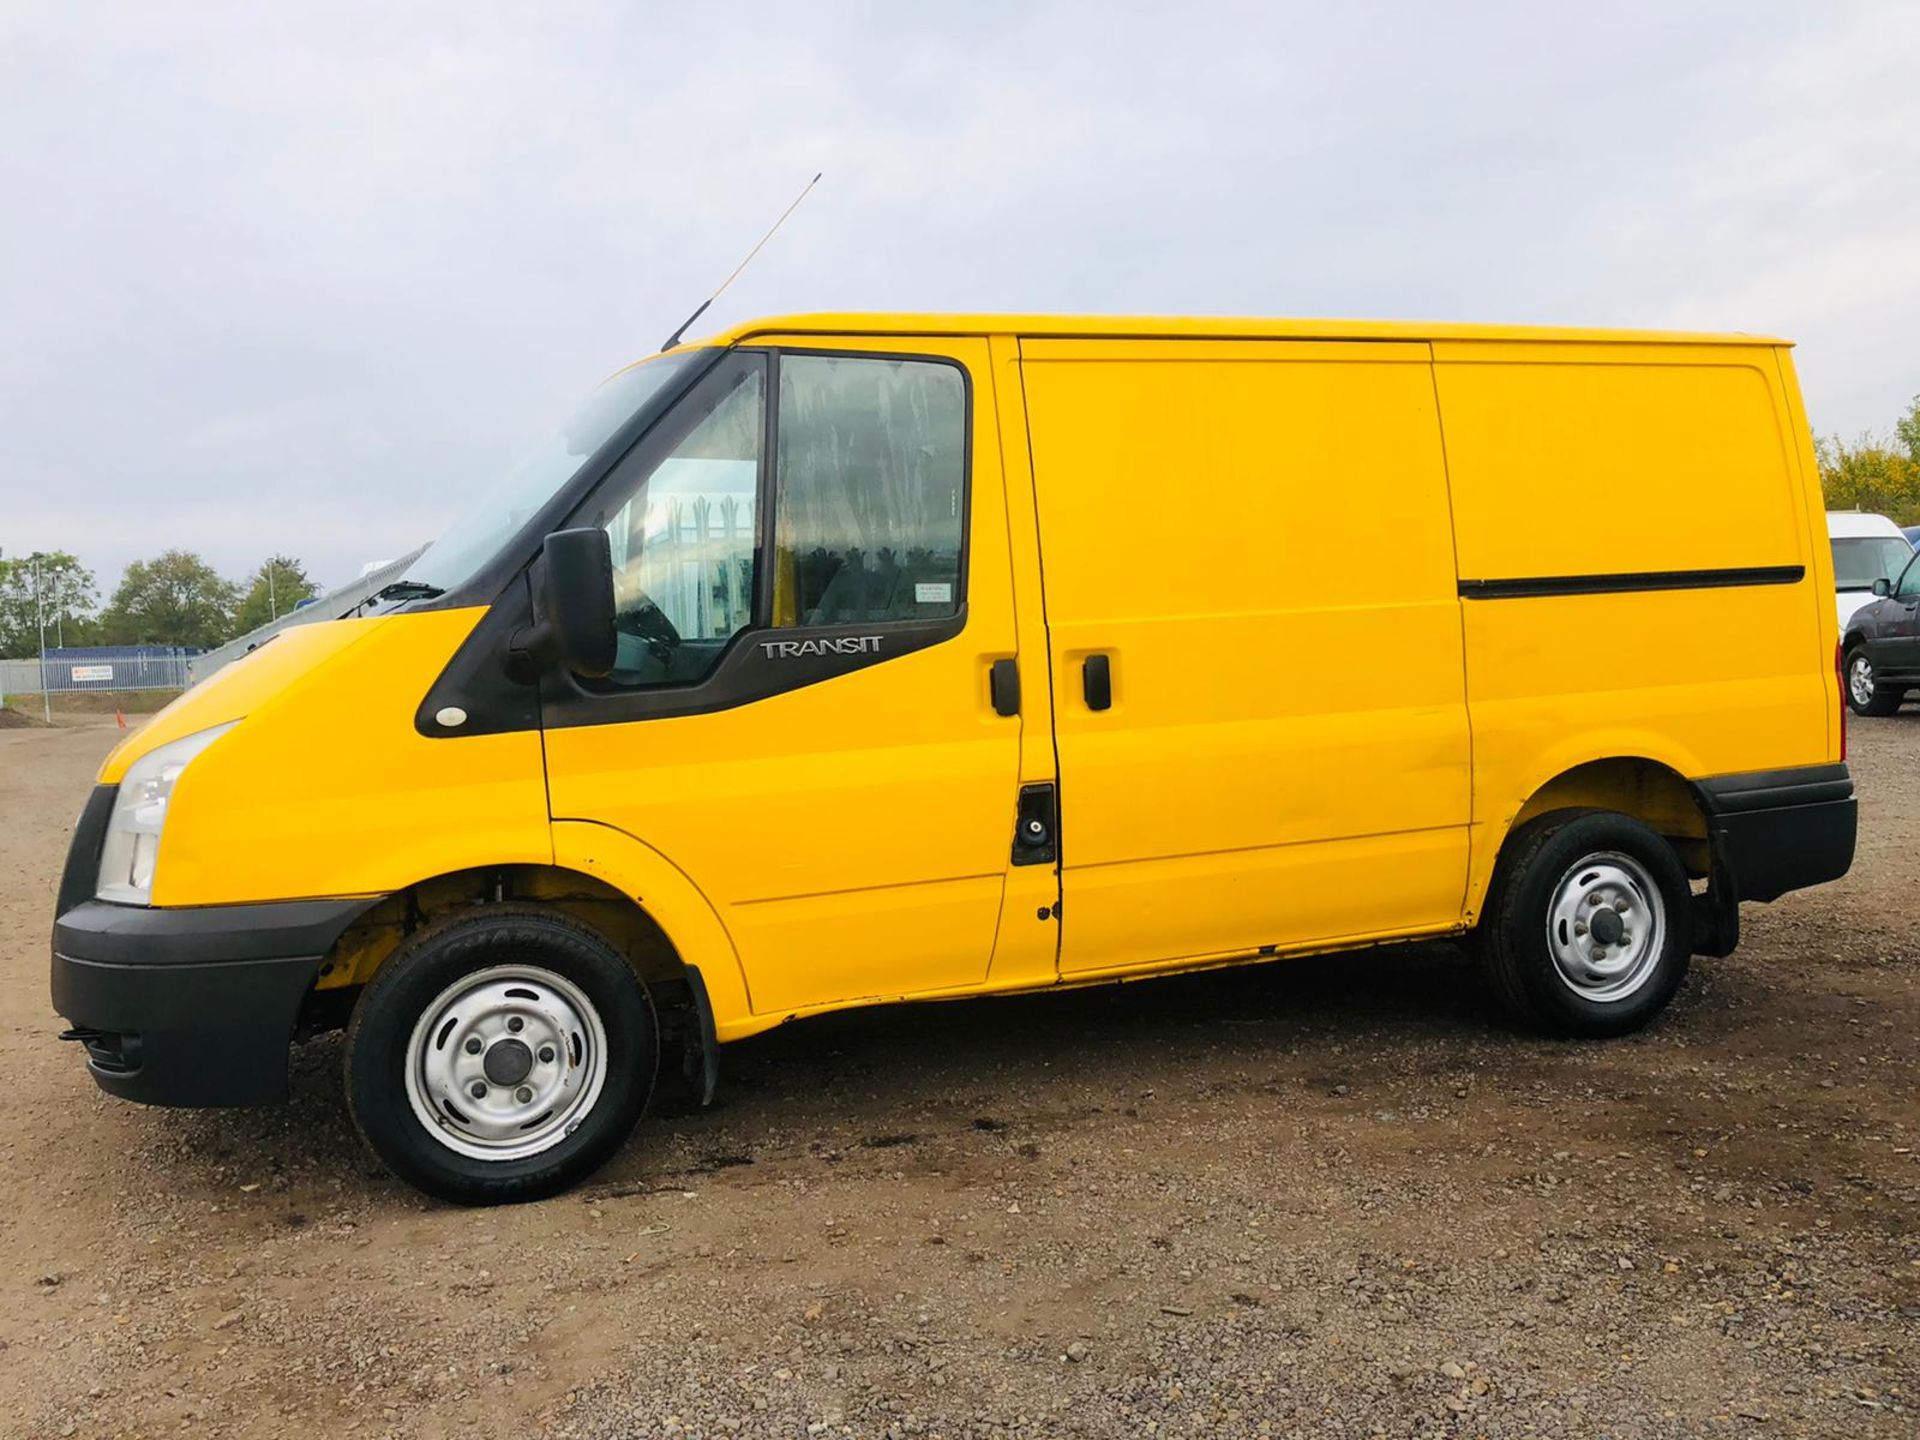 Ford Transit 2.2 TDCI 125 T300 L1 H1 FWD 2011 '61 Reg' Air Con - Elec Pack - No Vat Save 20% - Image 8 of 32